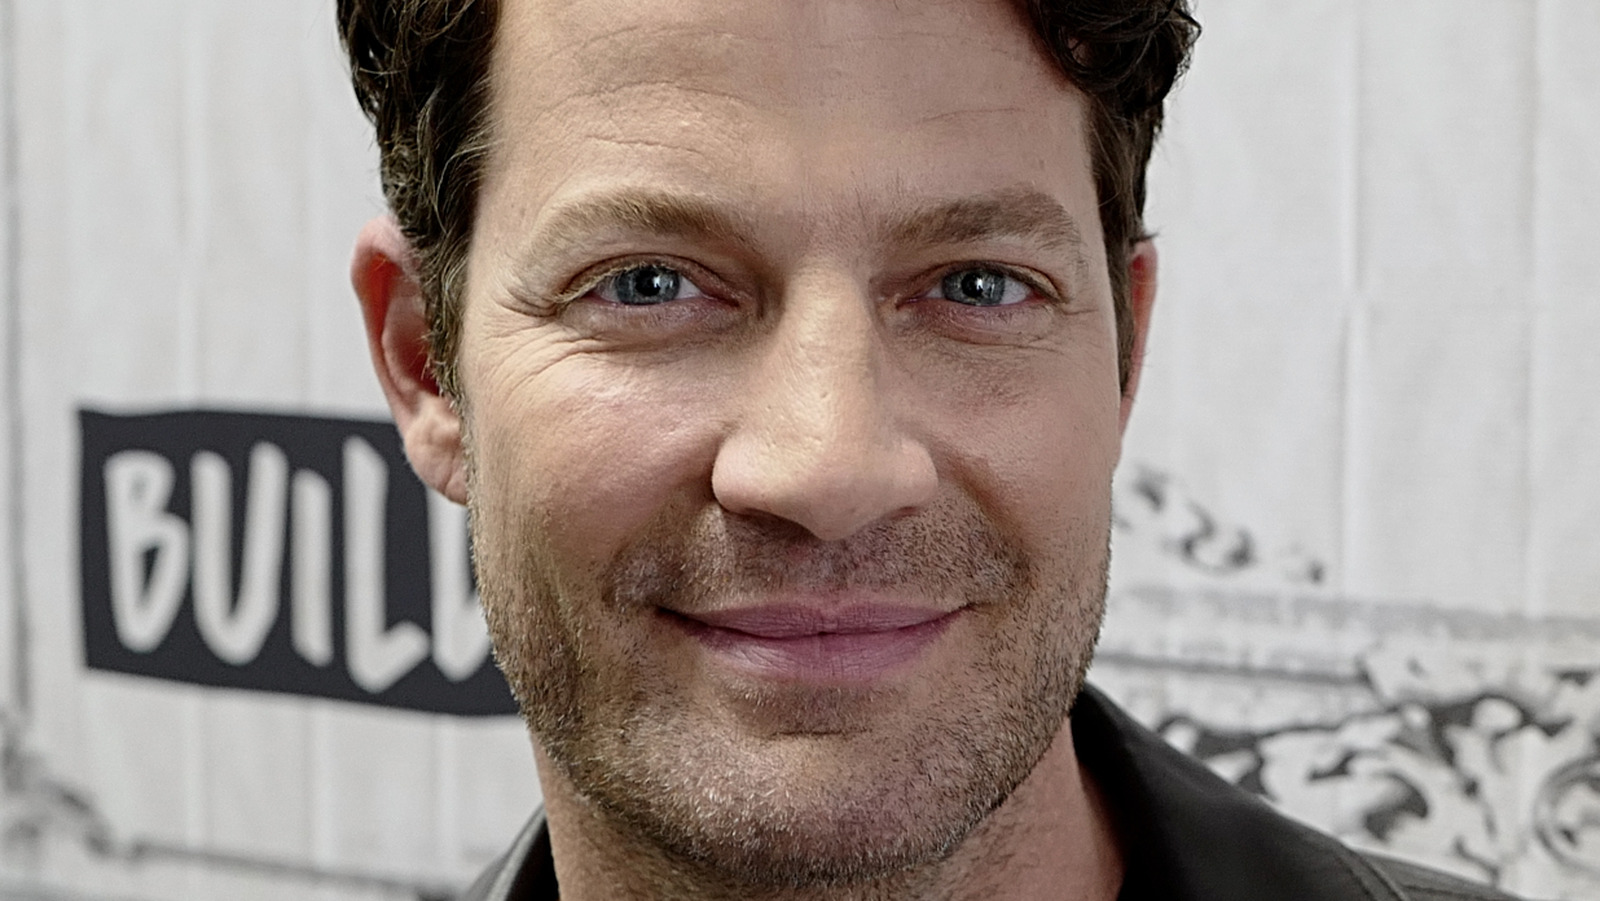 https://www.thelist.com/img/gallery/the-home-design-trend-nate-berkus-cant-stand-exclusive/l-intro-1639678761.jpg